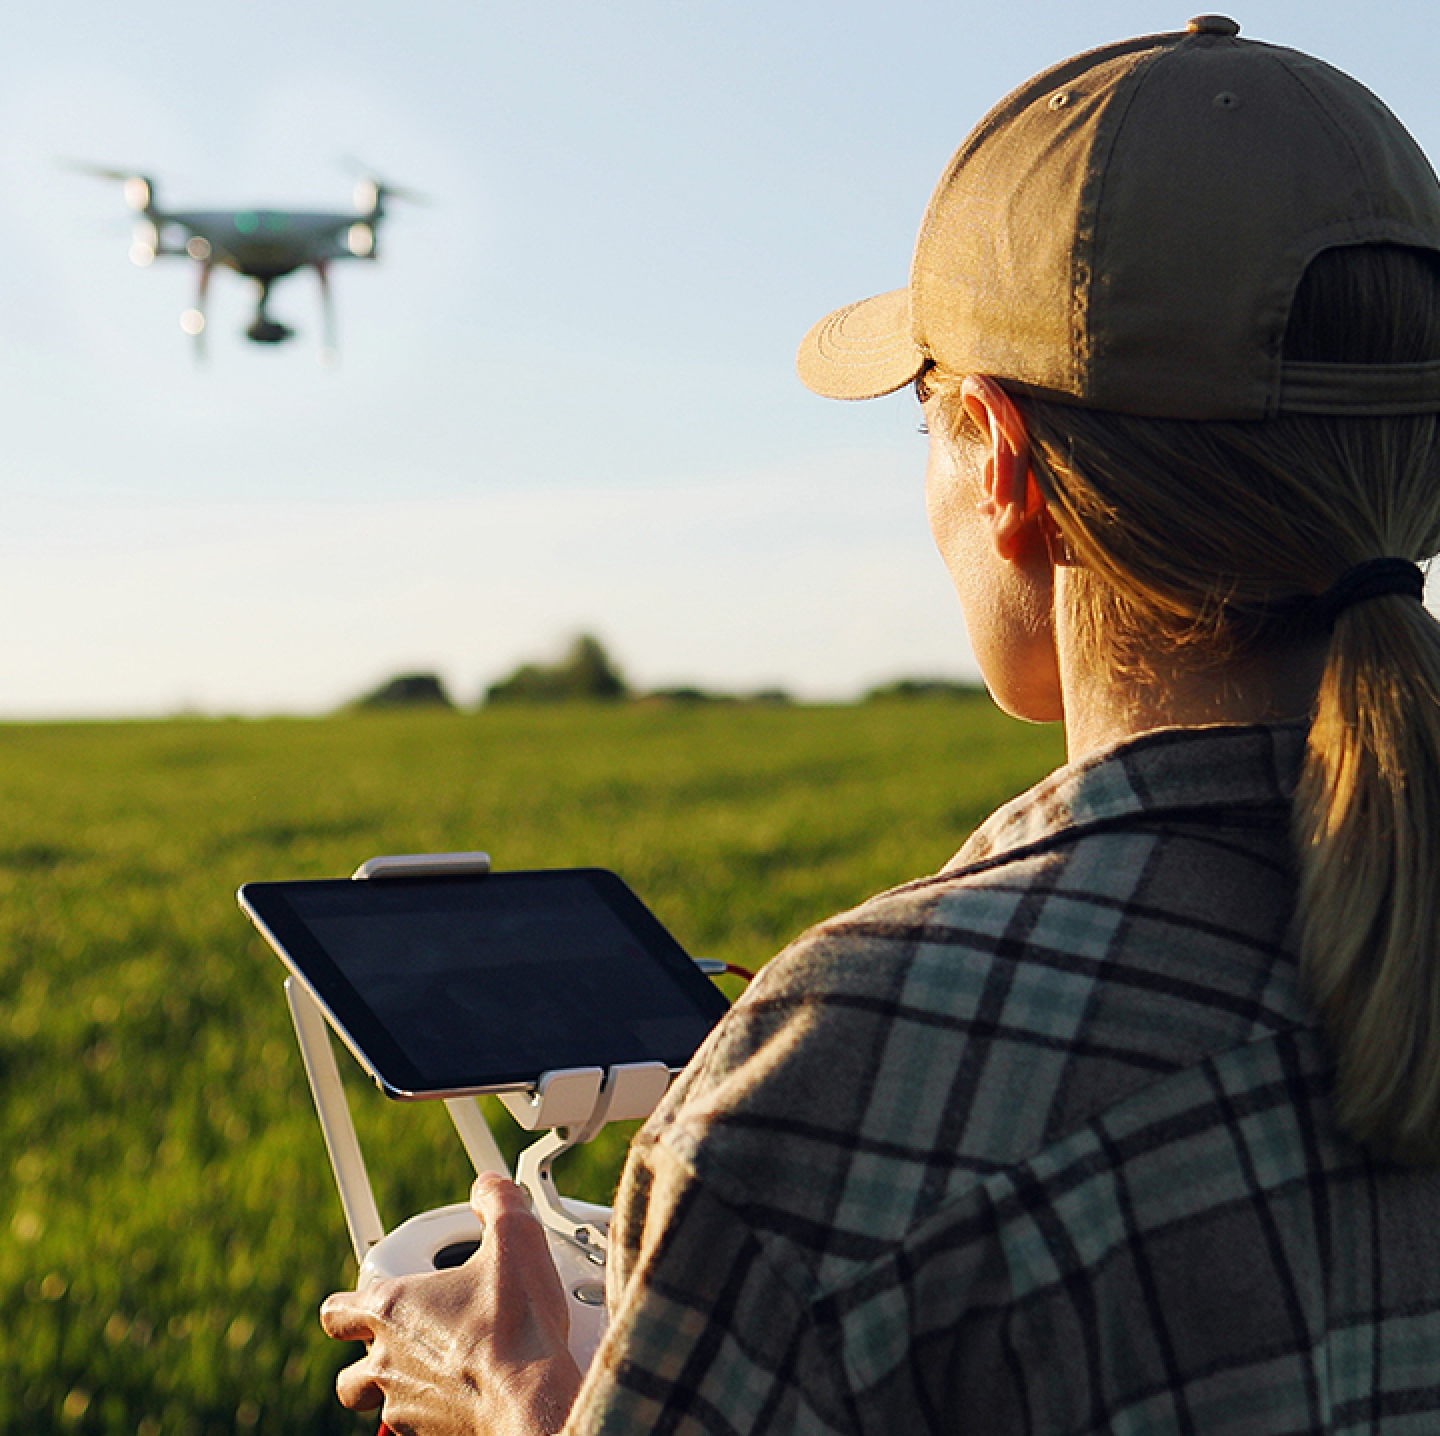 Over the shoulder view of a person in an open field wearing a plaid shirt and a hat while operating a drone